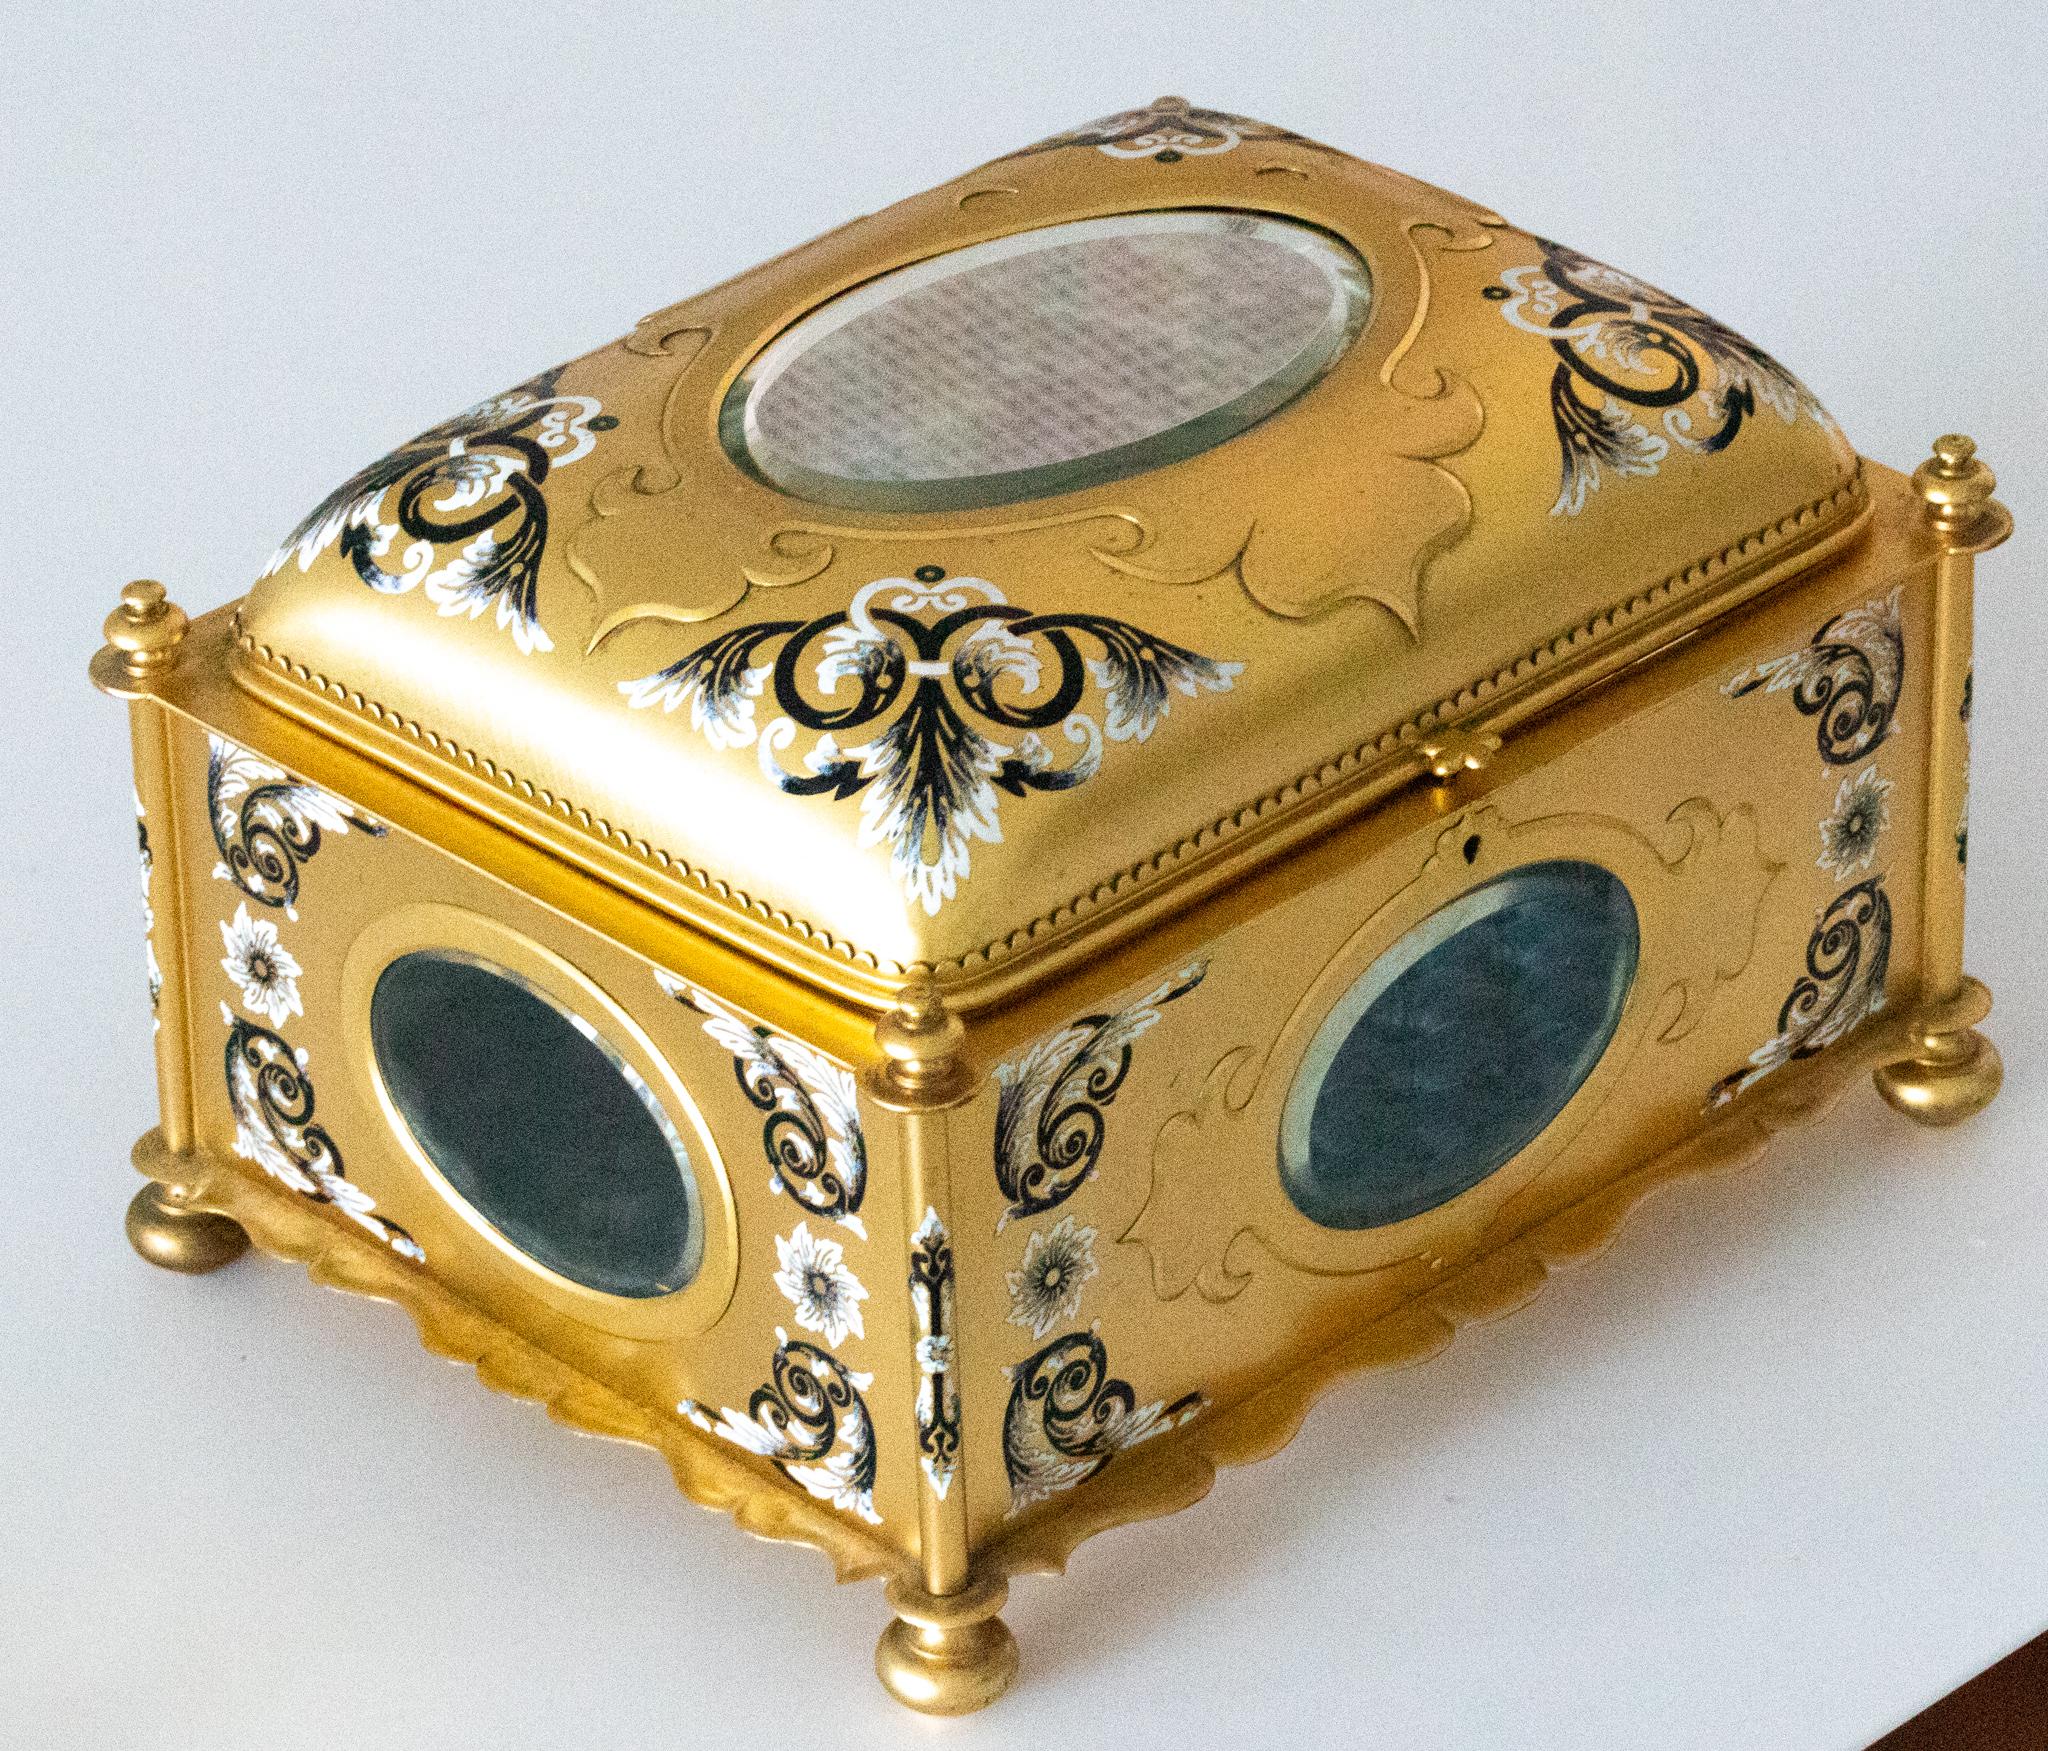 Mid-19th Century France 1865 Etruscan Revival Ormolu Jewelry Box Case with Cloisonne Champleve